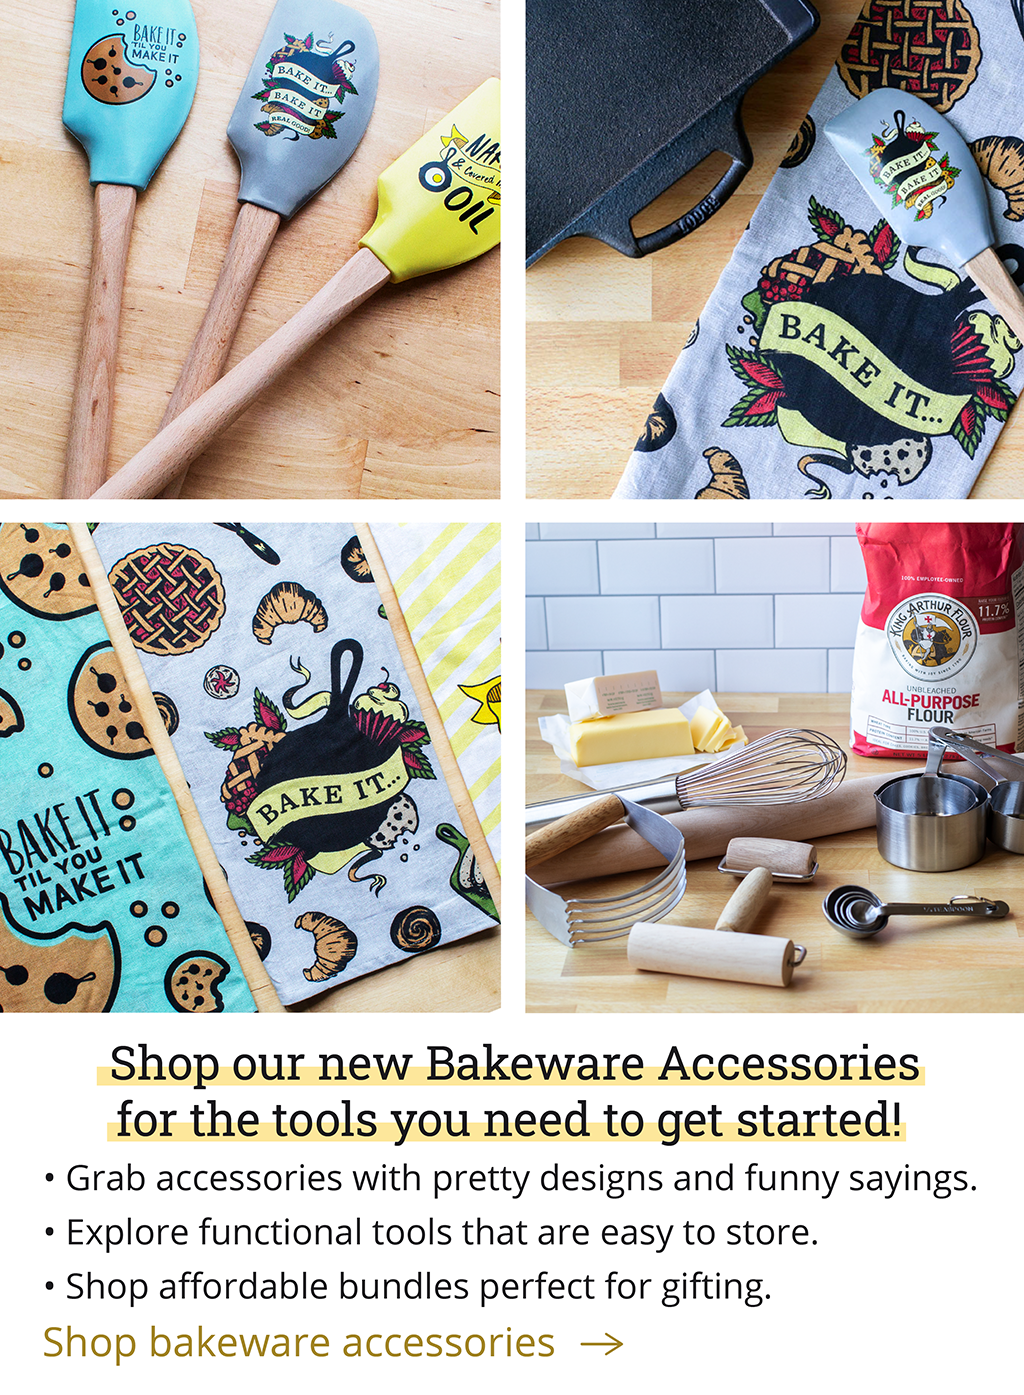 Shop our new Bakeware Bundles for the tools you need to get started! . Grab accessories with pretty designs and funny sayings. . Explore functional tools that are easy to store. . Shop affordable bundles perfect for gifting. 